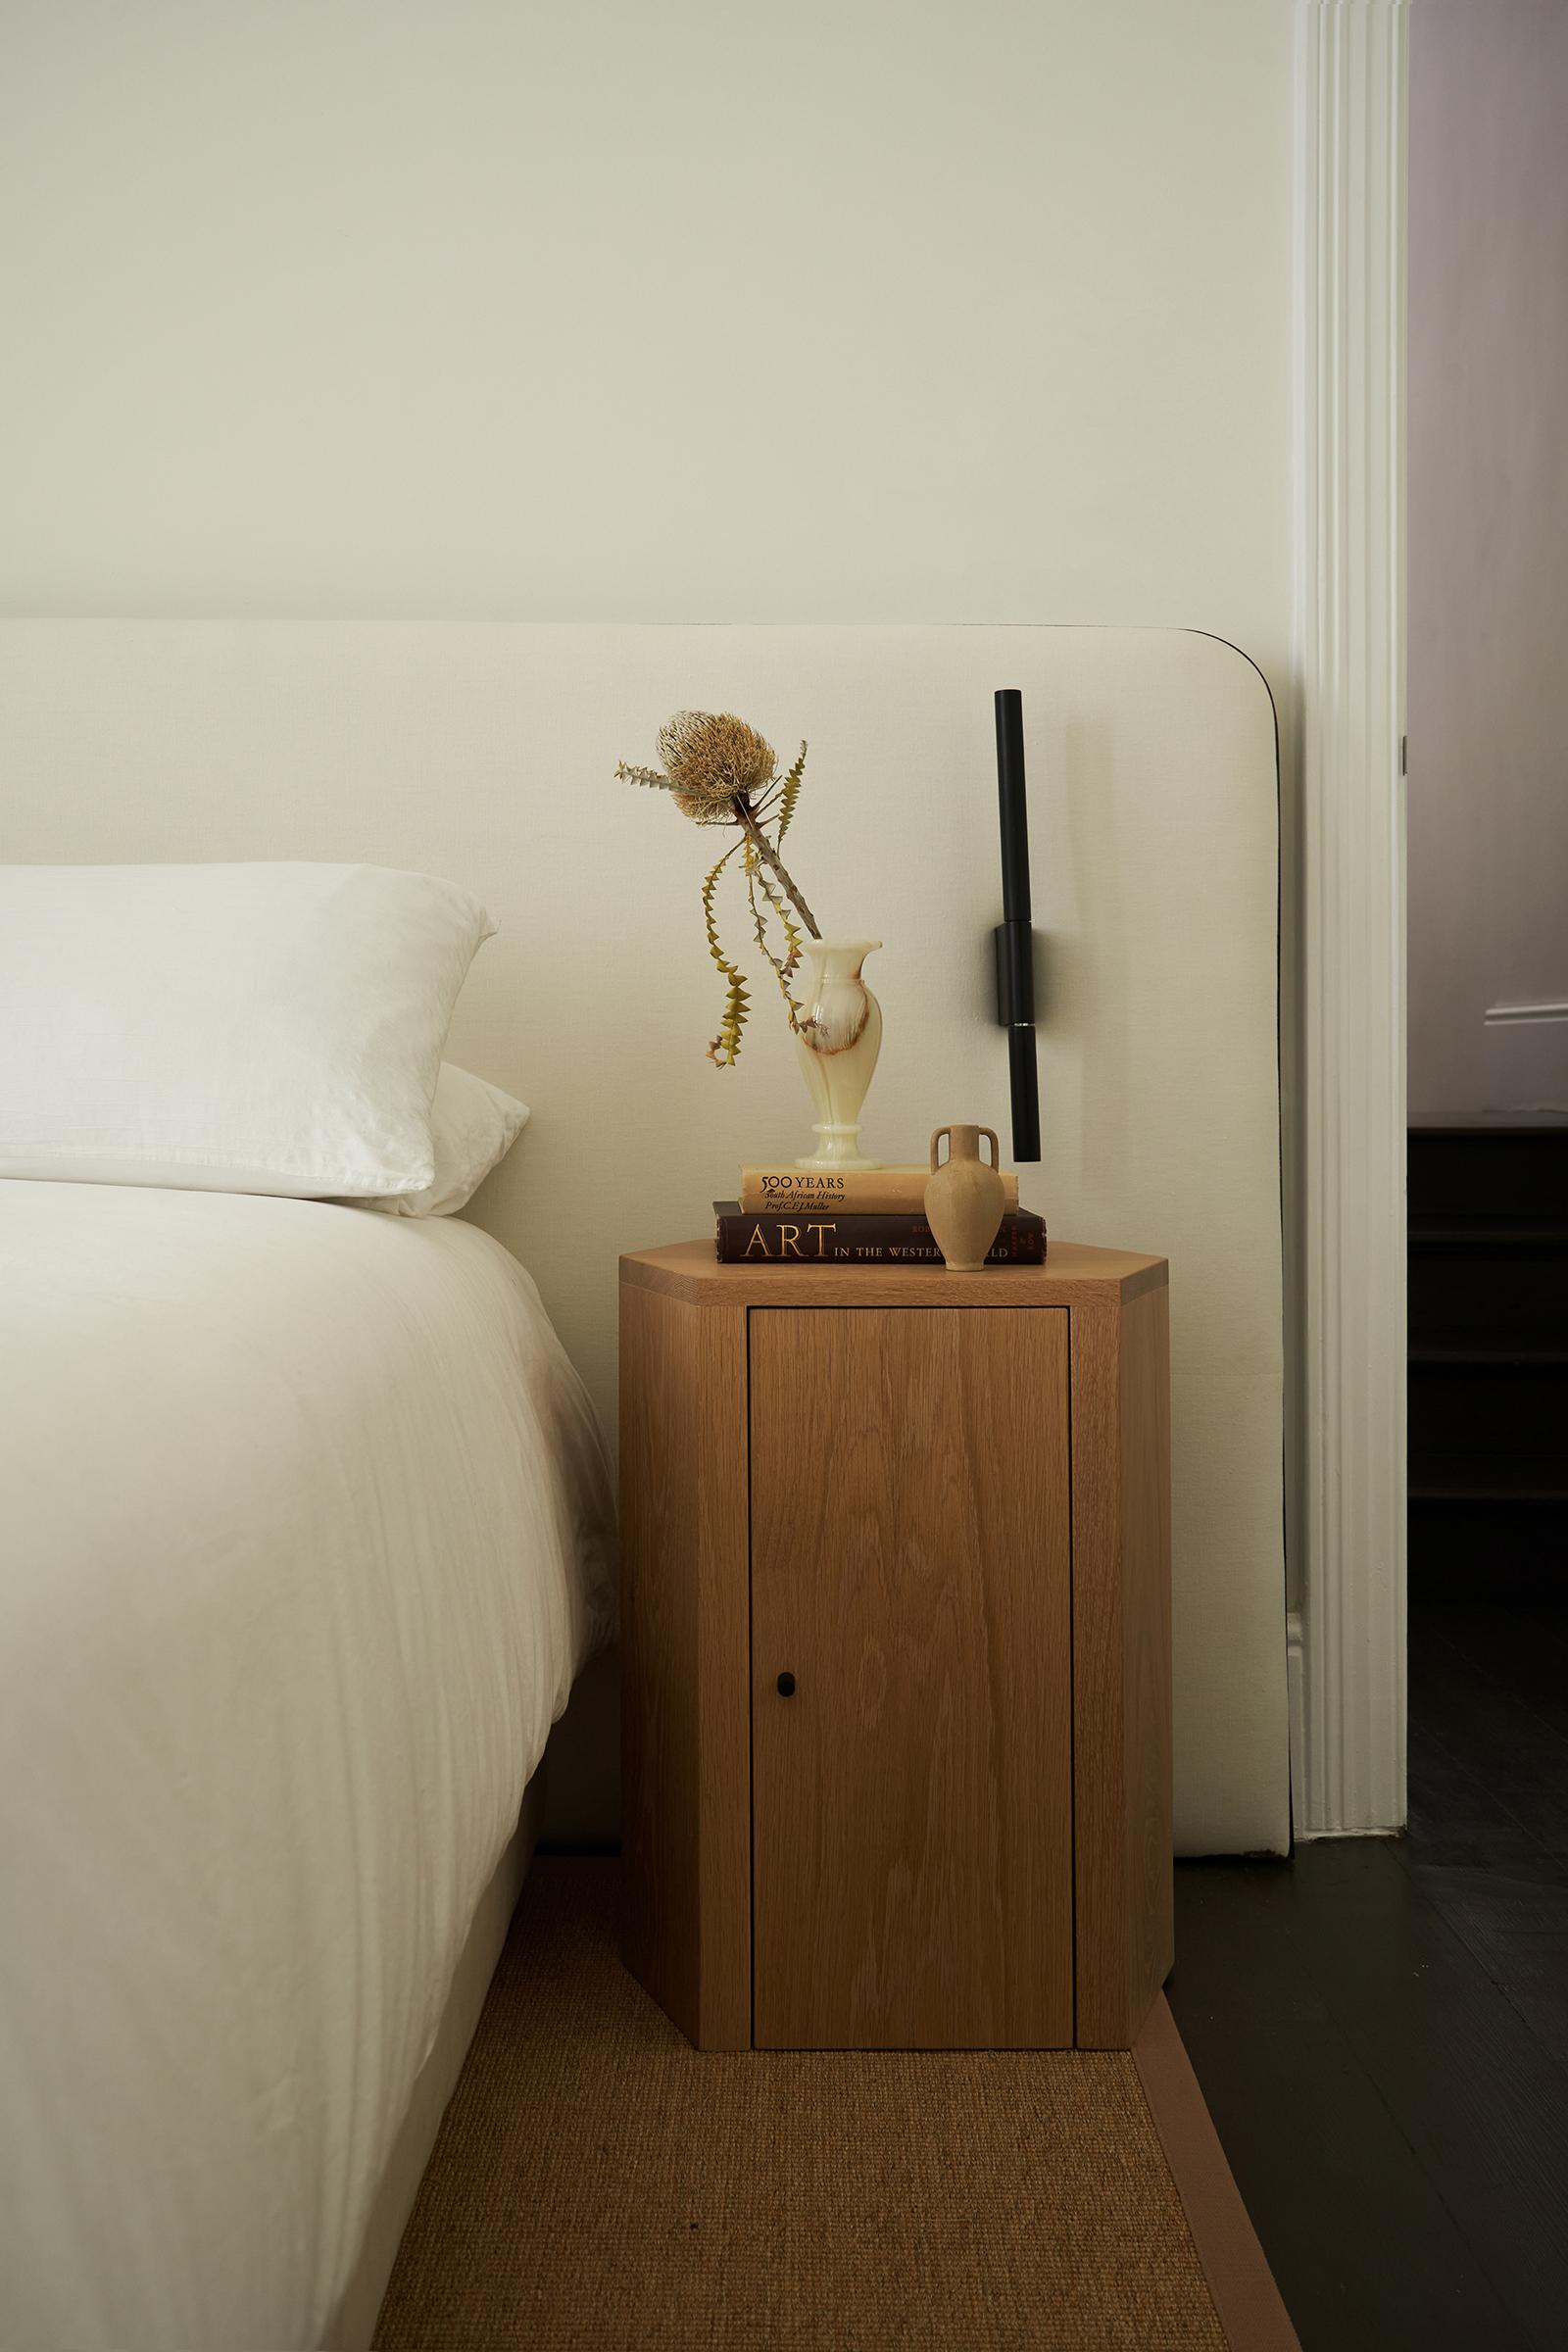 Neatly proportioned with exceptional detailing, the Park nightstand is your perfect bedside partner. In our furniture making, the idea is to create special pieces that you can build a space around, whose designs highlight rather than overshadow the